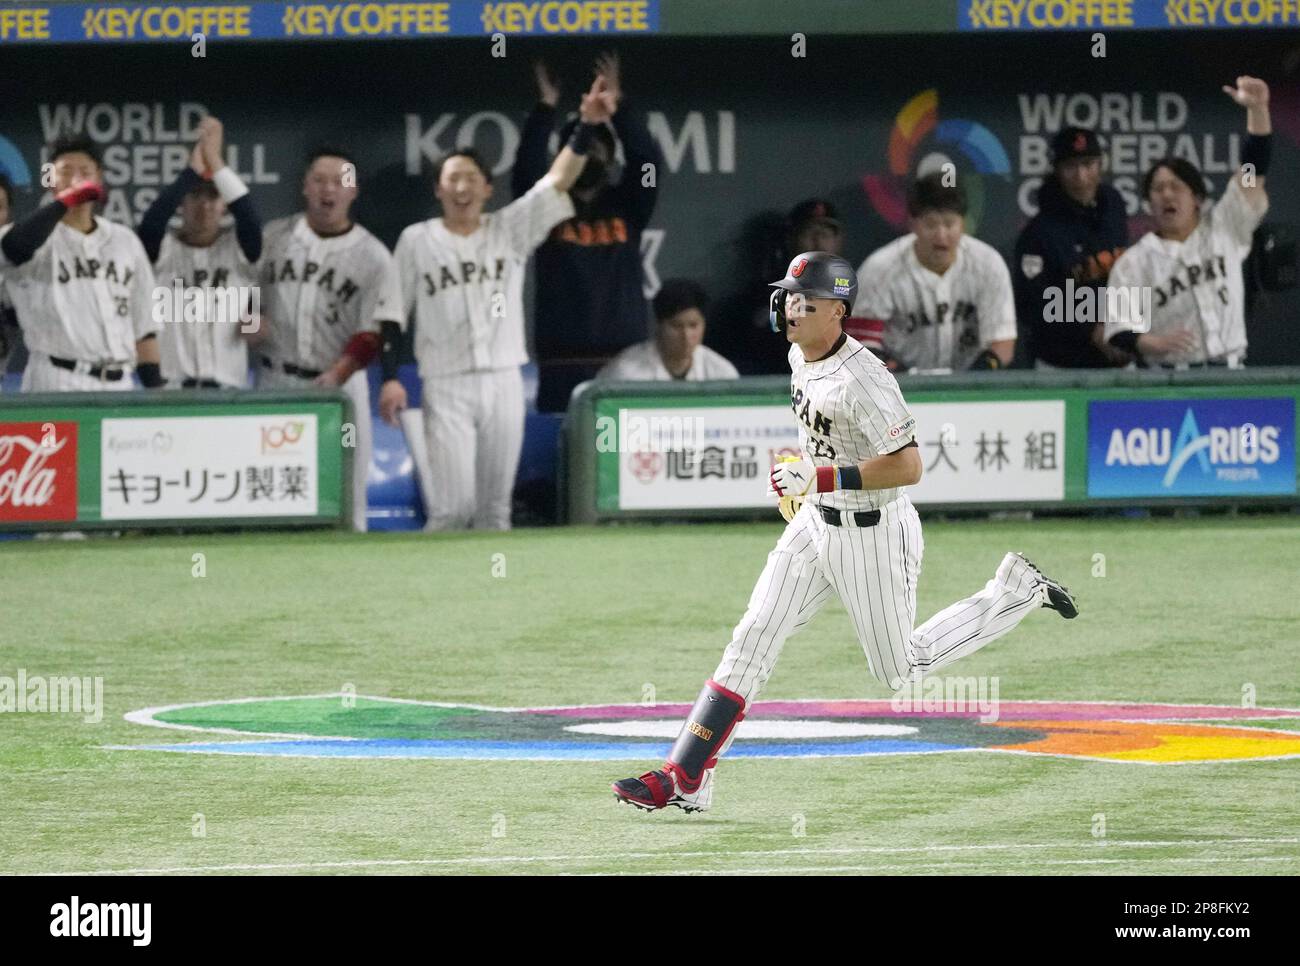 Lars Nootbaar of Japan runs to the first base after hitting a